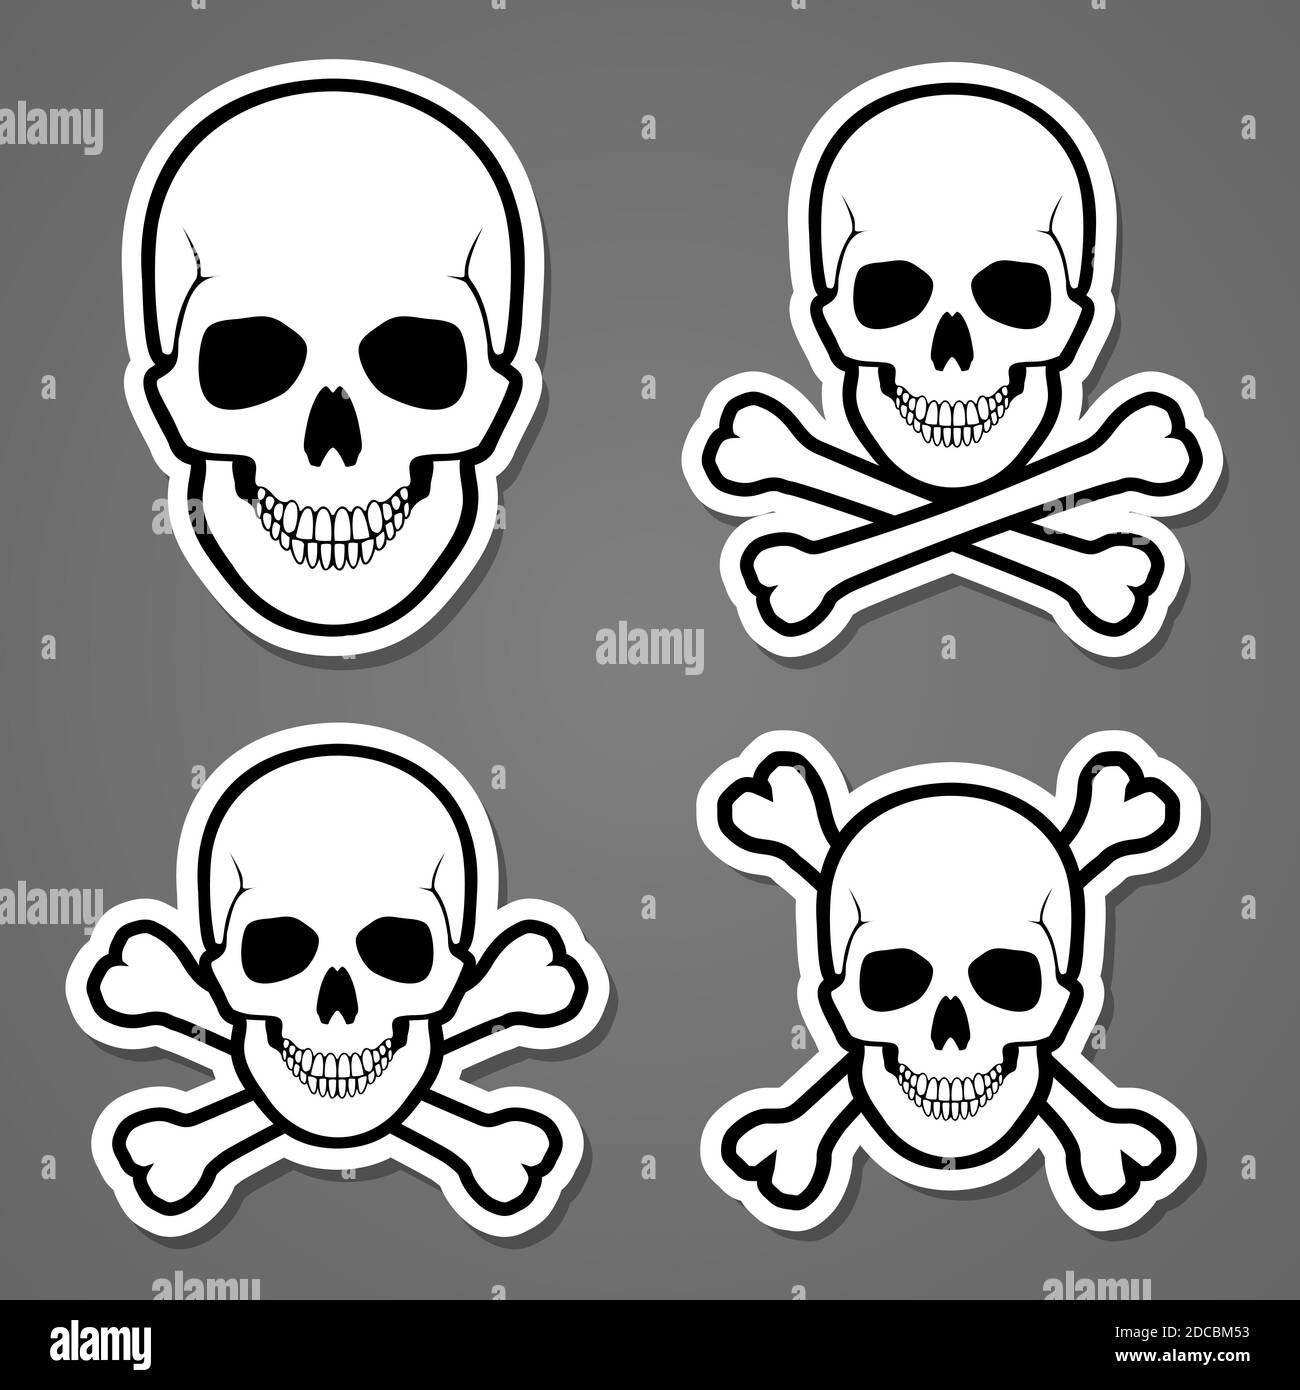 Human skull symbol with crossbones poison symbol and jolly roger button or sticker vector illustration Stock Vector